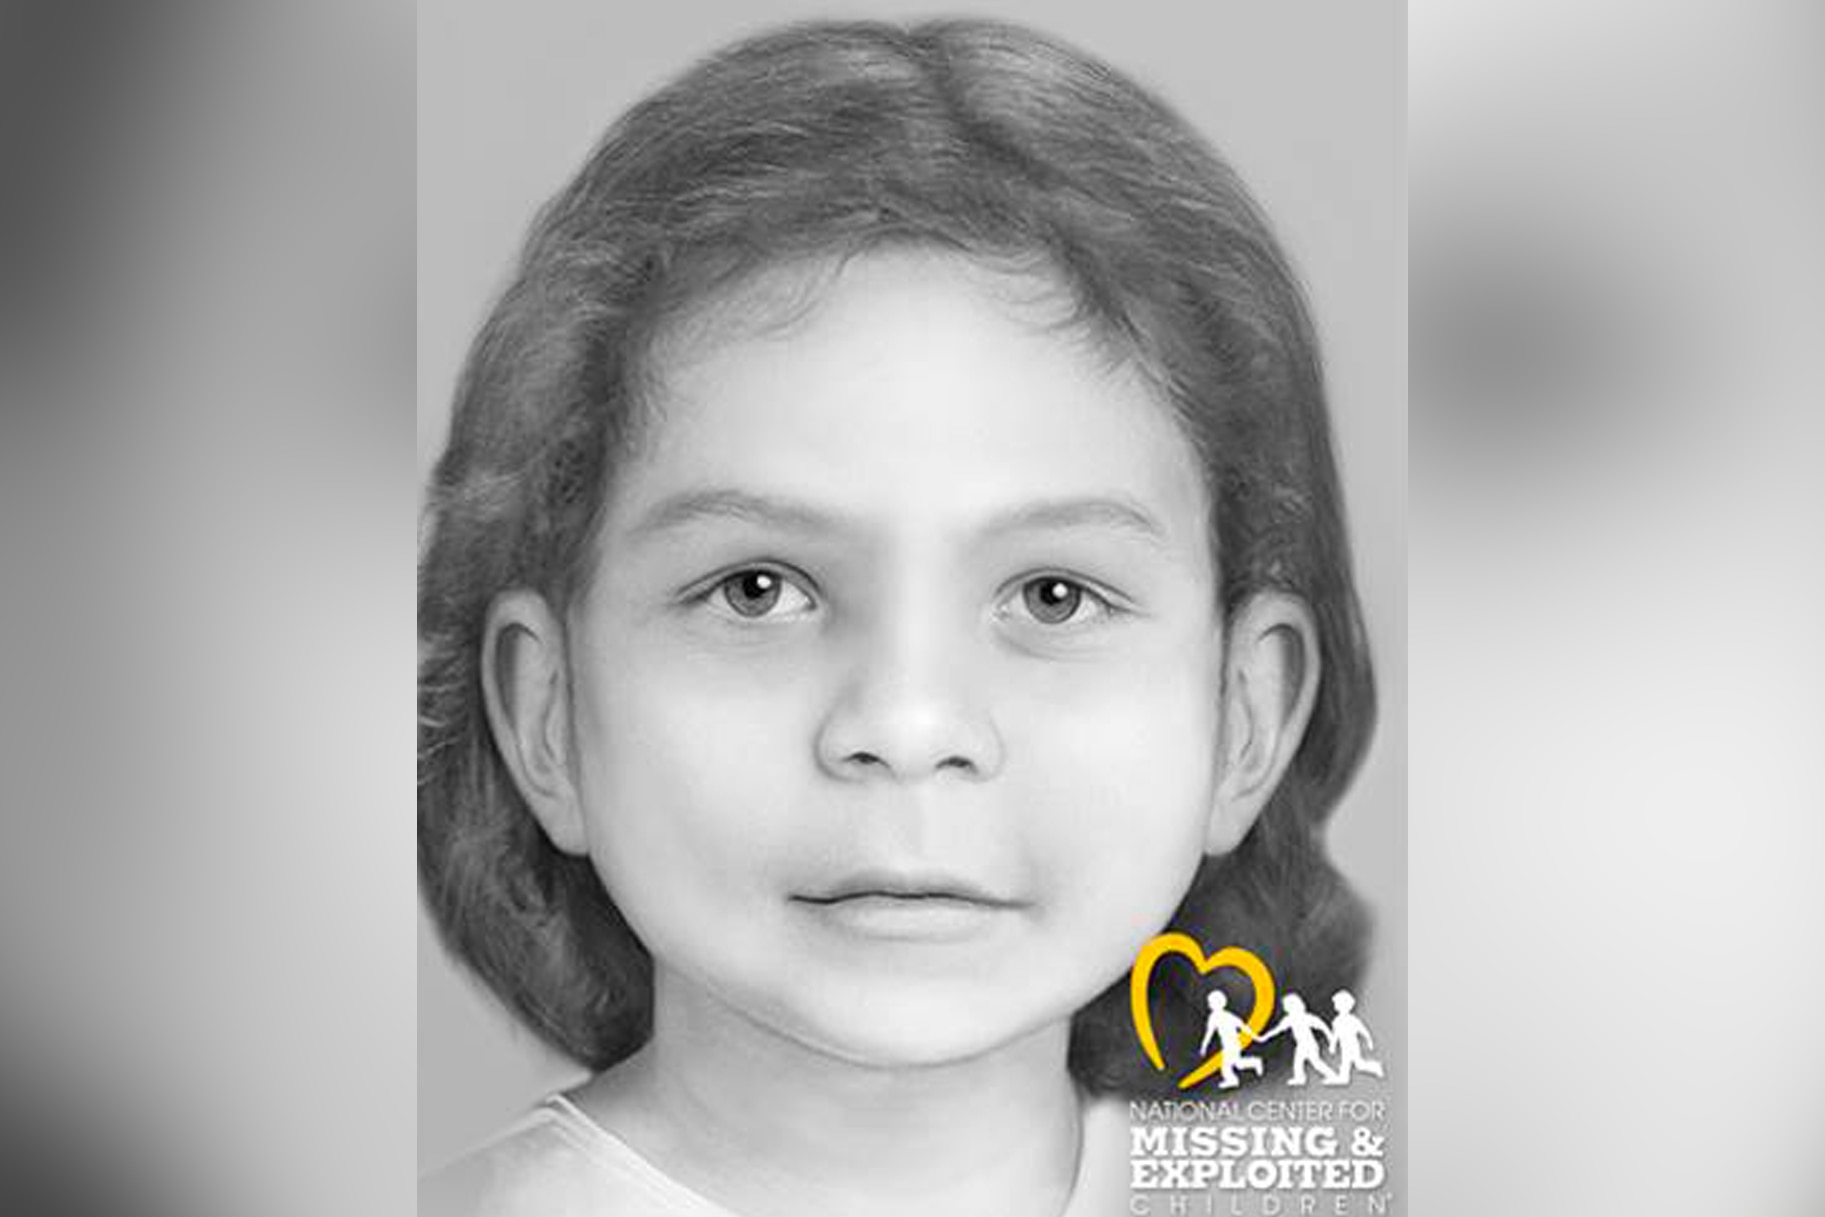 A photo provided by NCMEC of Bear Brook State Park's Missing Child